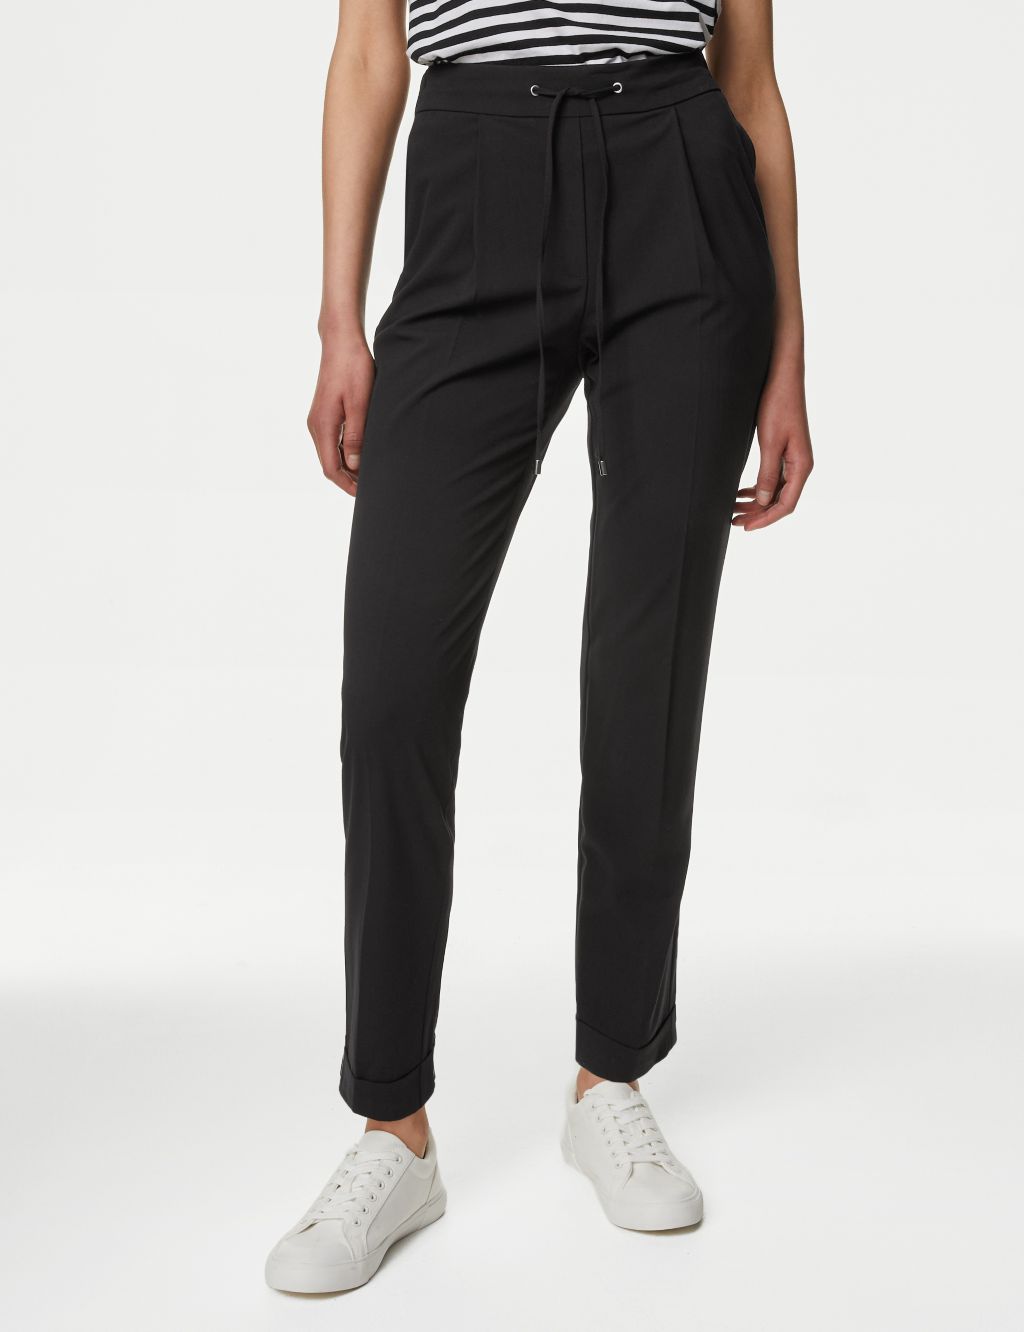 Drawstring Tapered Ankle Grazer Trousers image 4